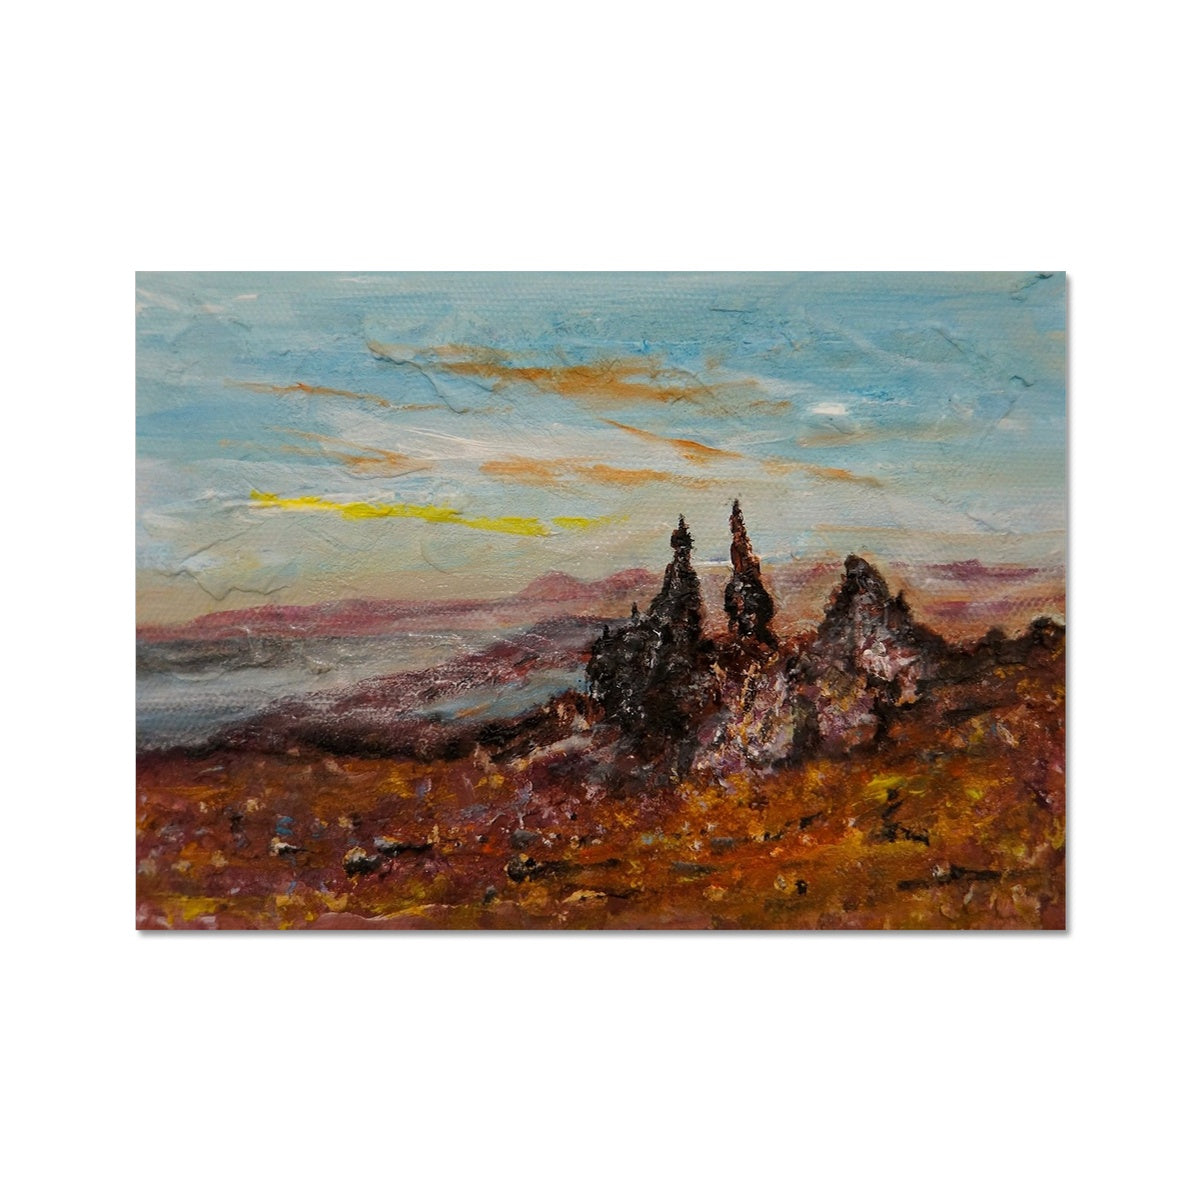 The Storr Skye Painting | Fine Art Prints From Scotland-Unframed Prints-Skye Art Gallery-A4 Landscape-Paintings, Prints, Homeware, Art Gifts From Scotland By Scottish Artist Kevin Hunter